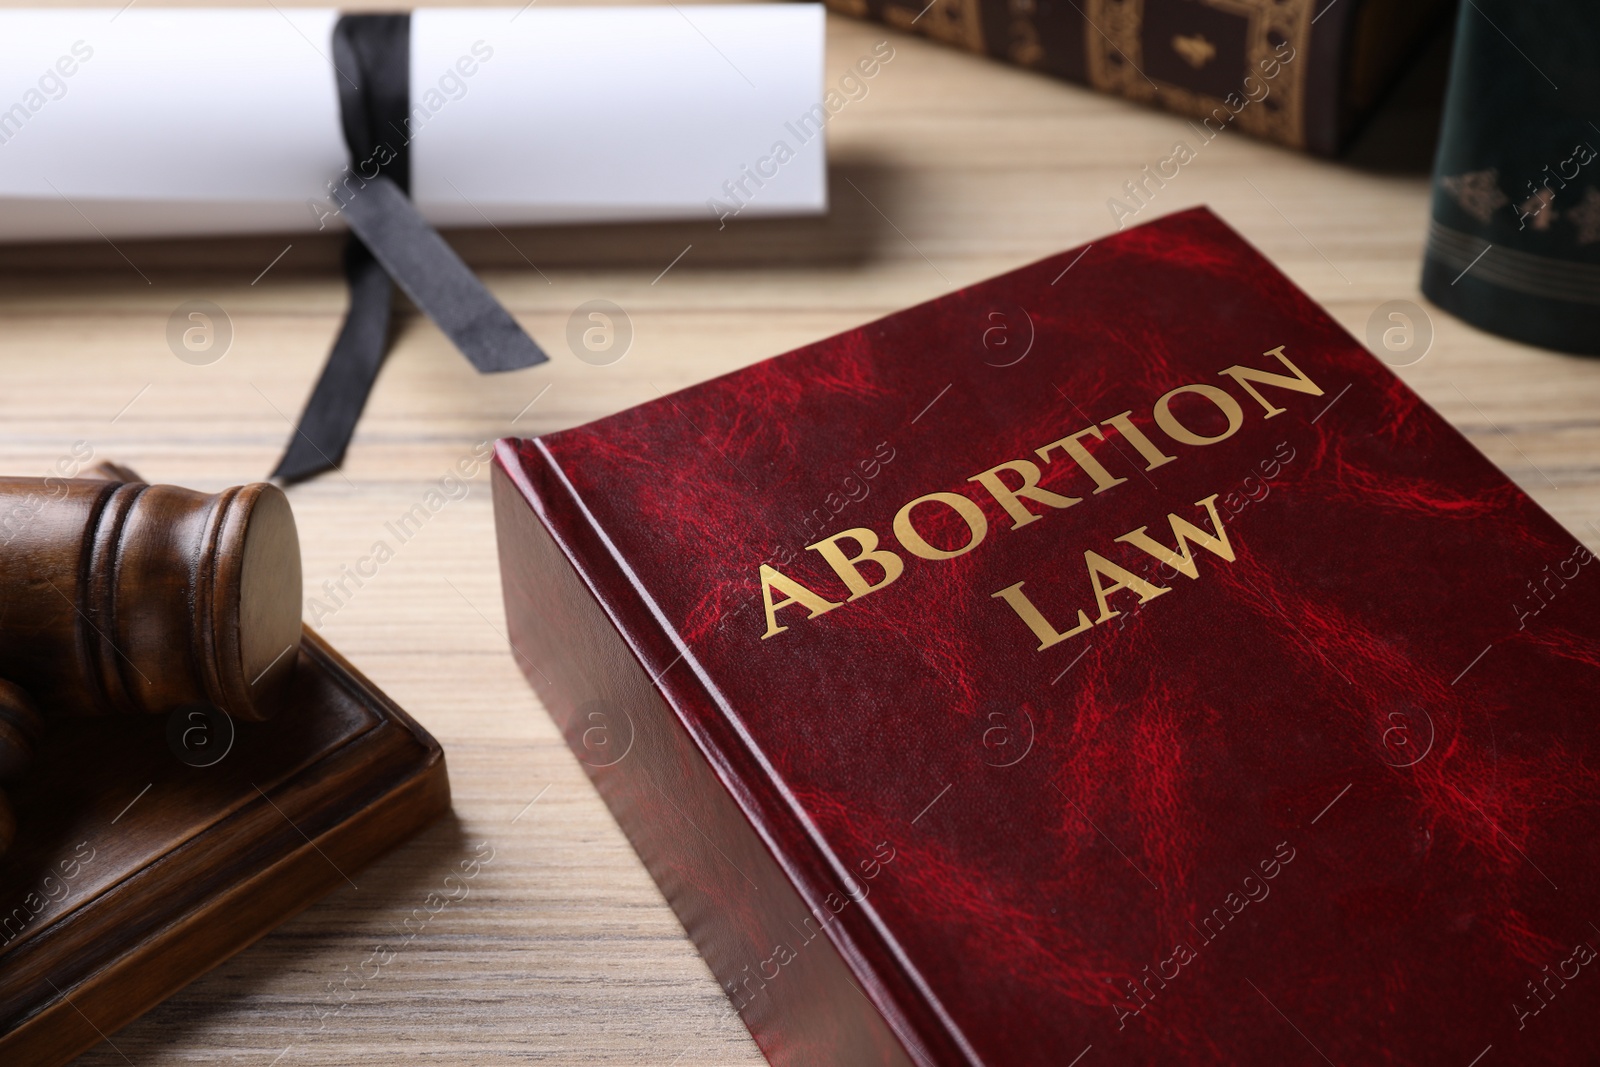 Image of Abortion Law book and gavel on wooden table